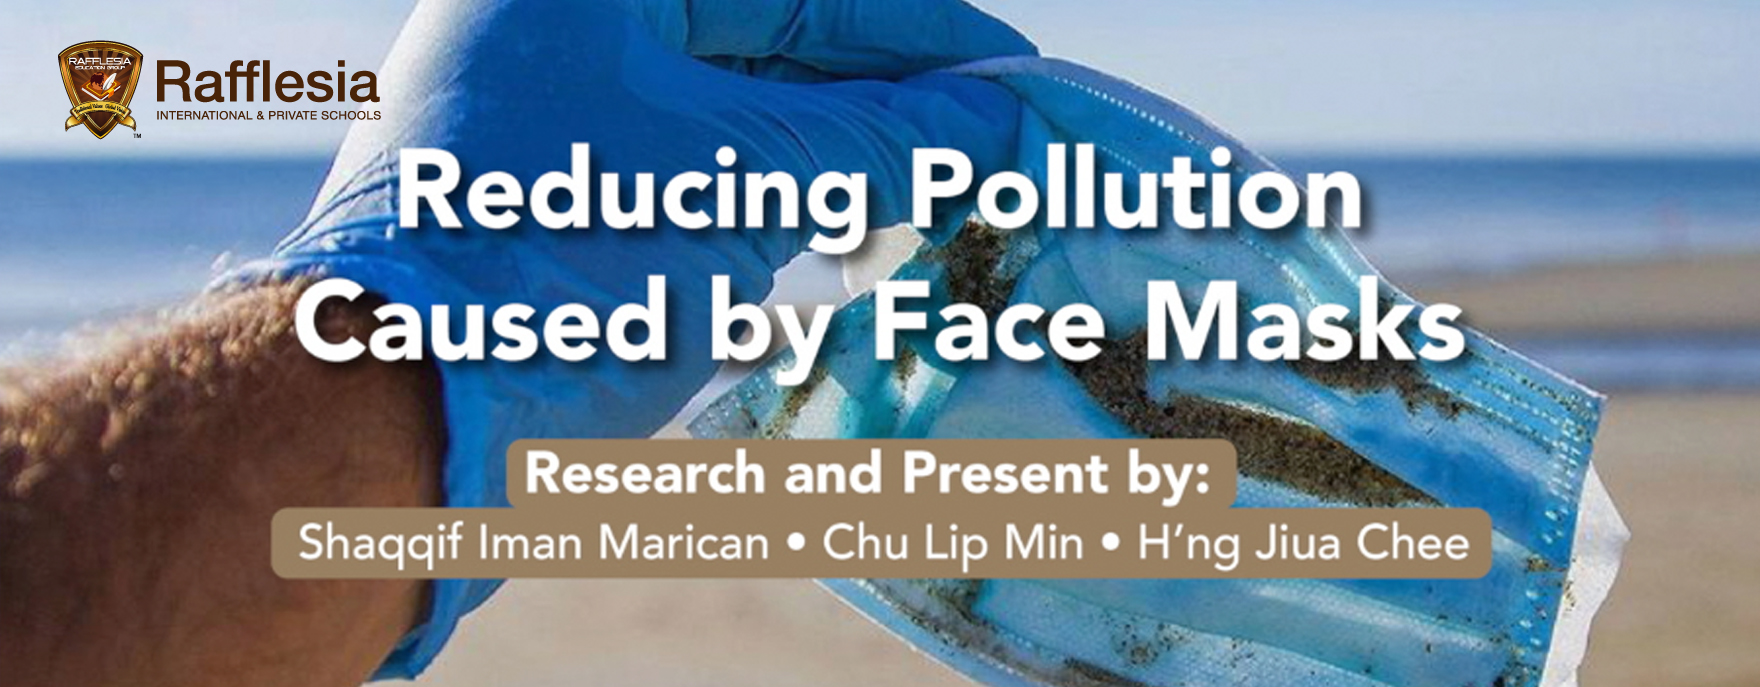 Reducing Pollution Caused by Face Masks